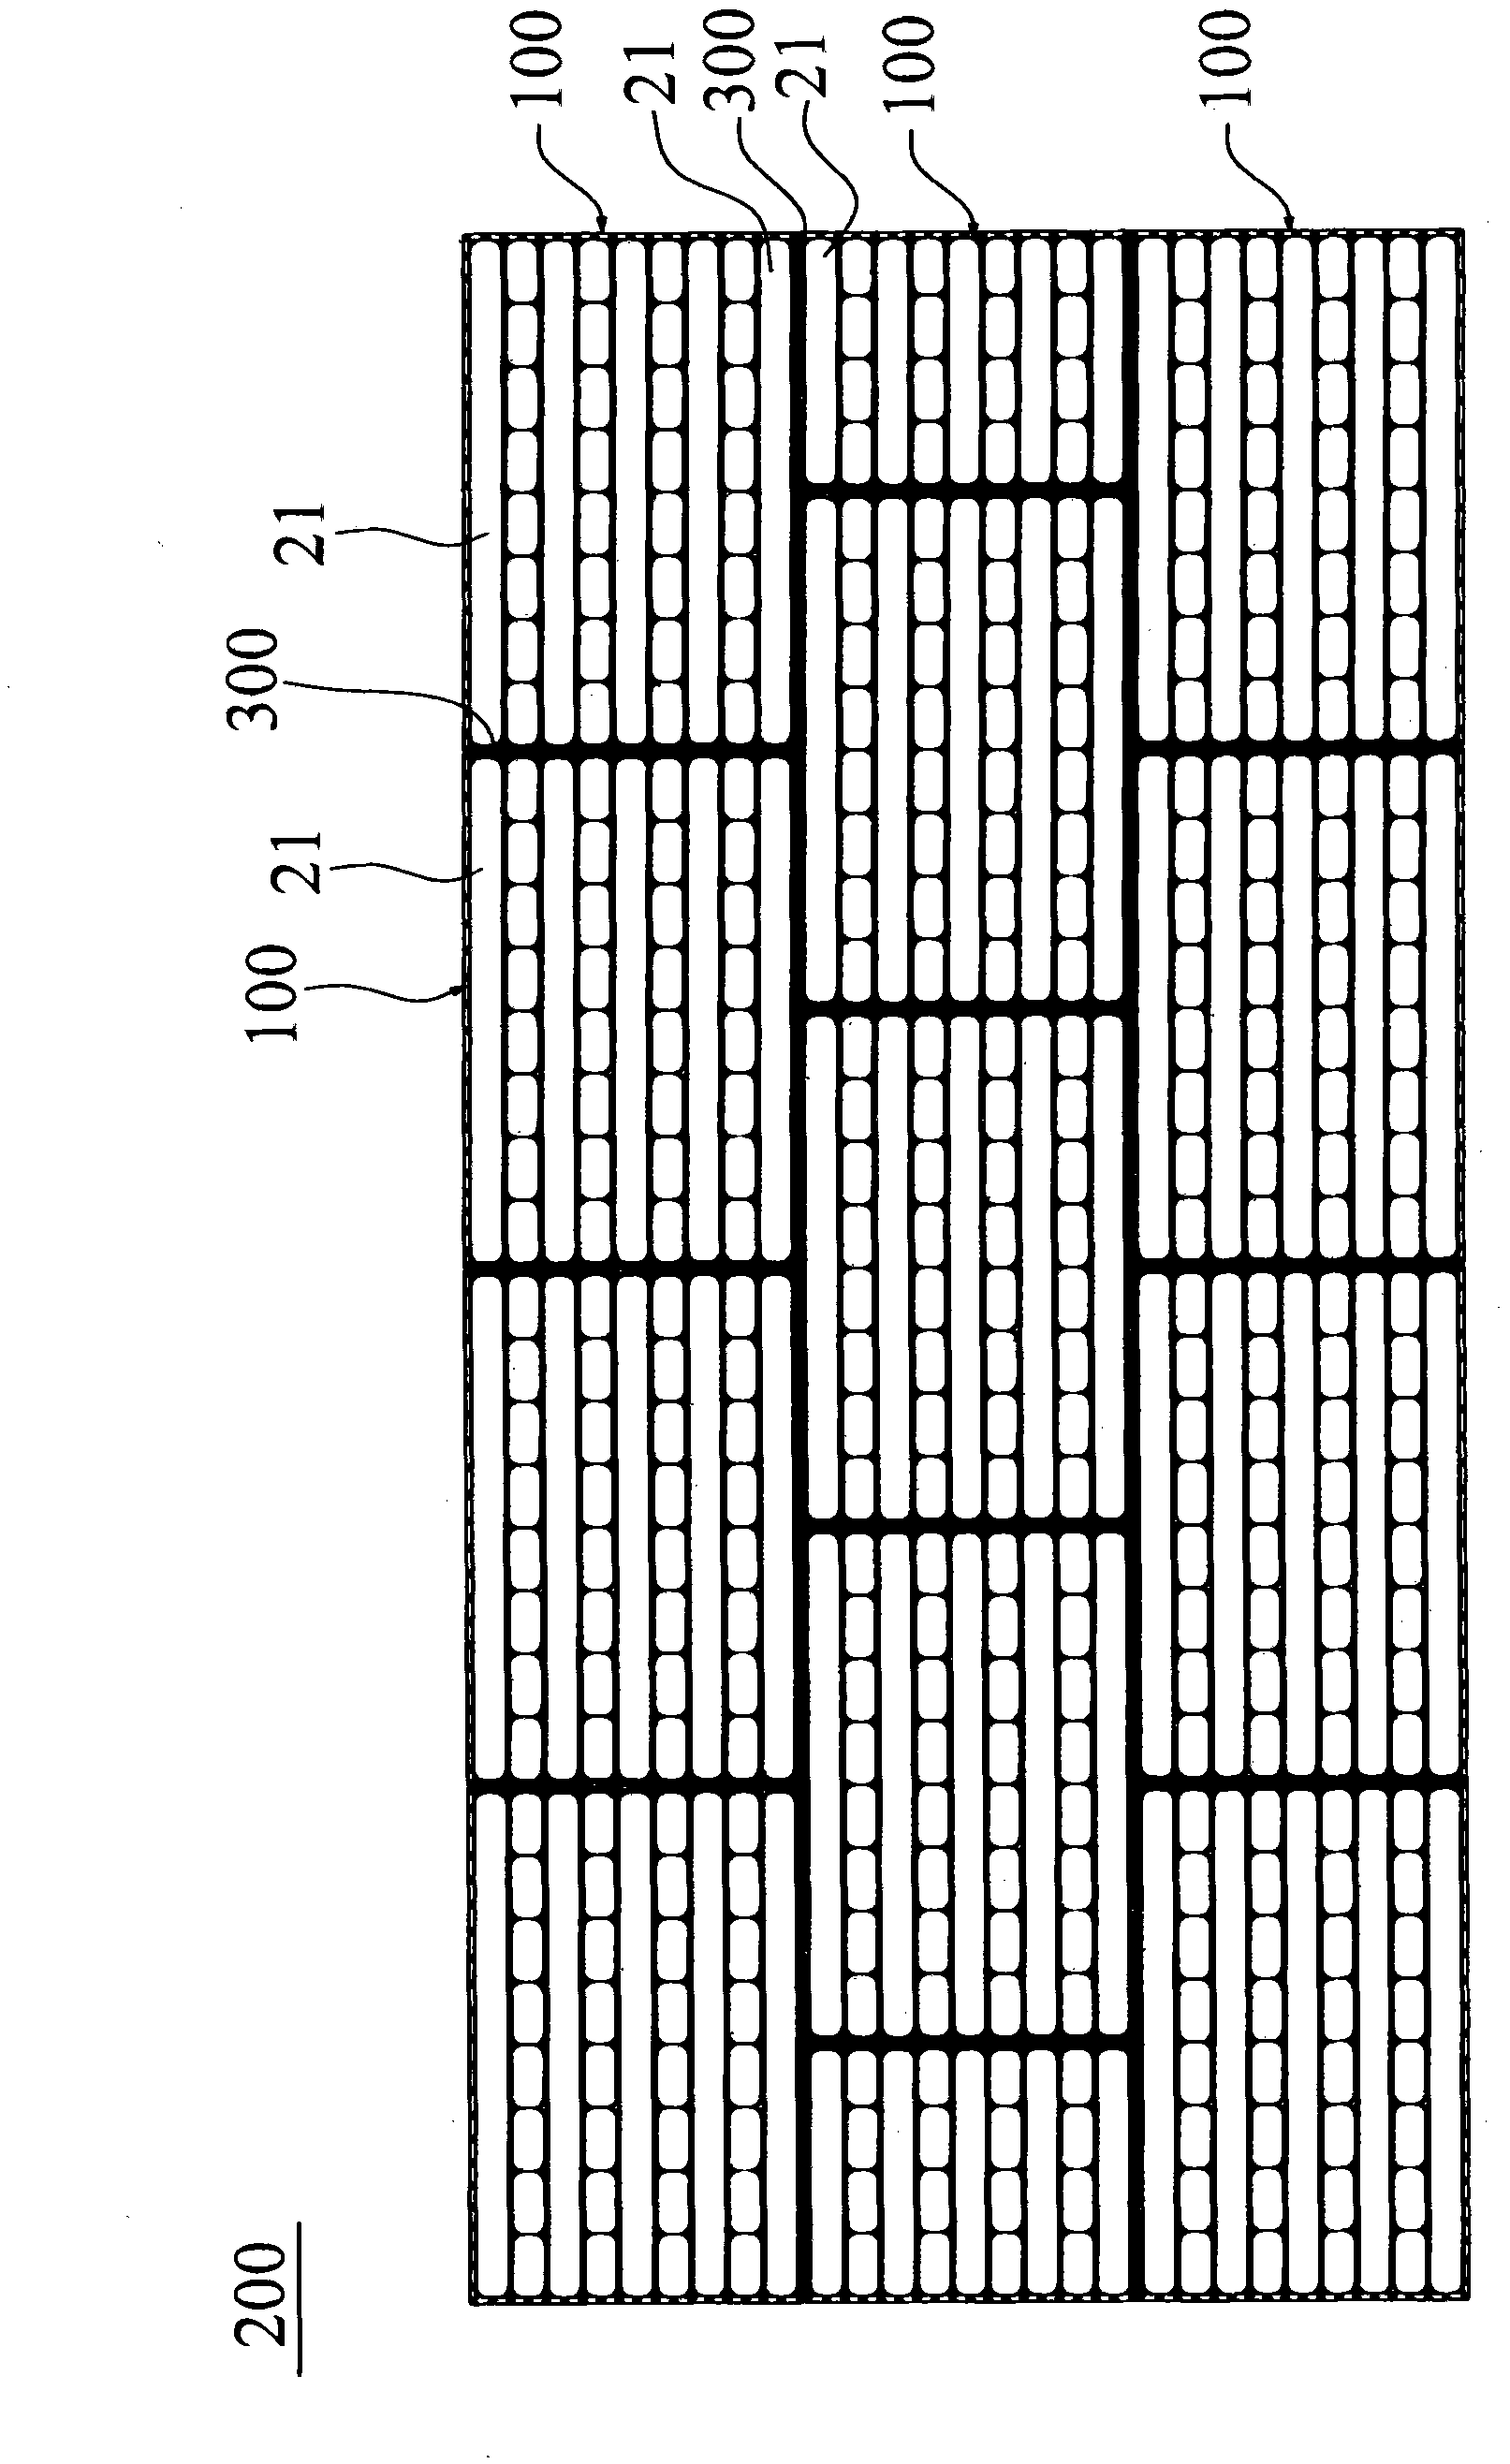 Ecological net cages and side slope retaining wall using same